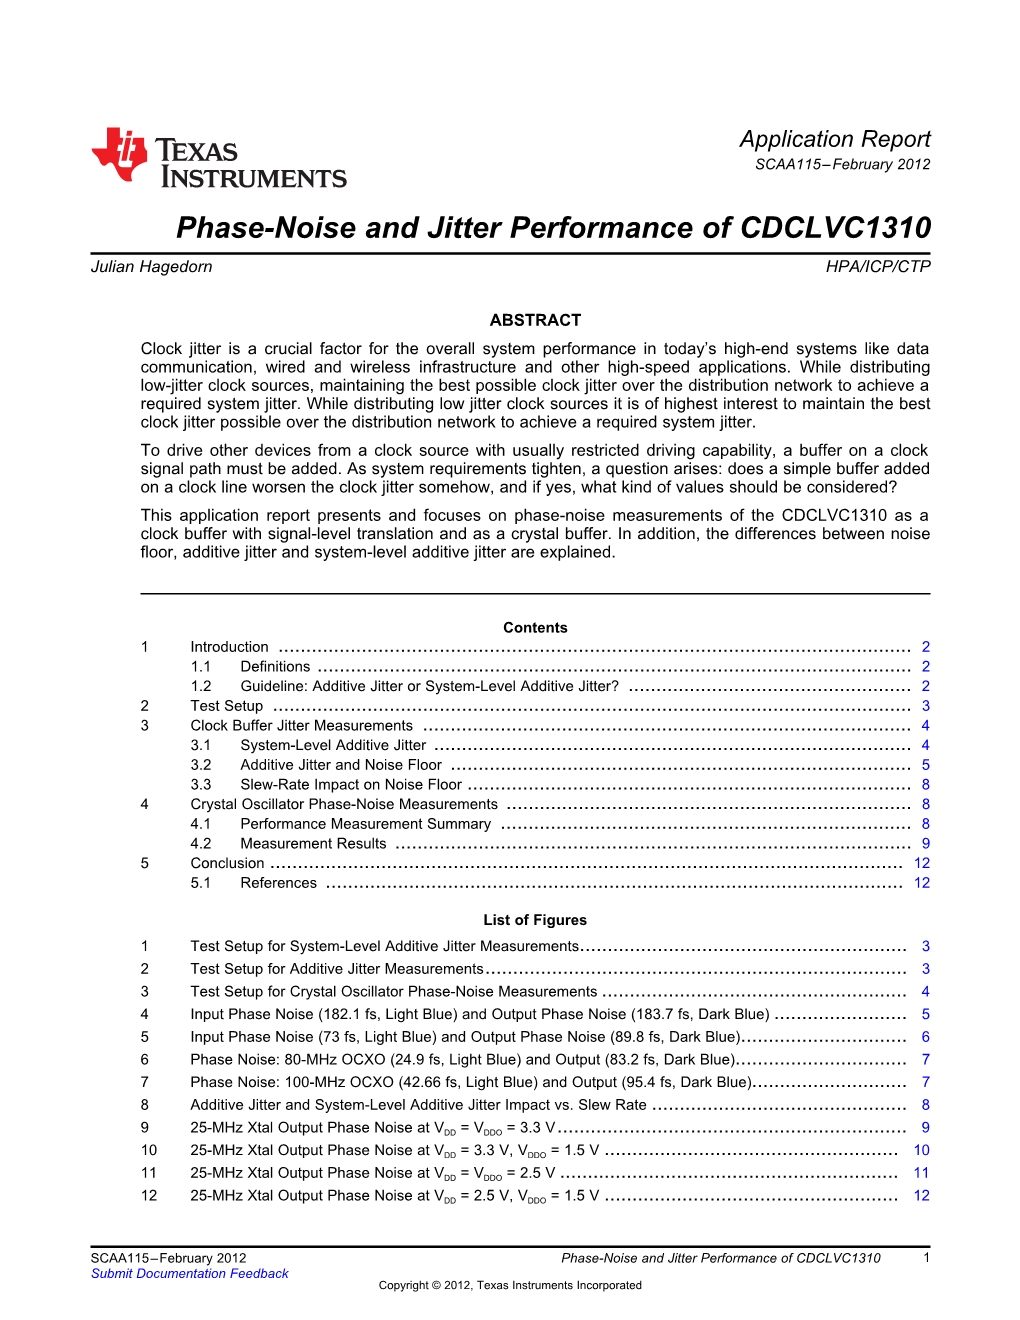 Phase Noise Performance of CDCLVC1310